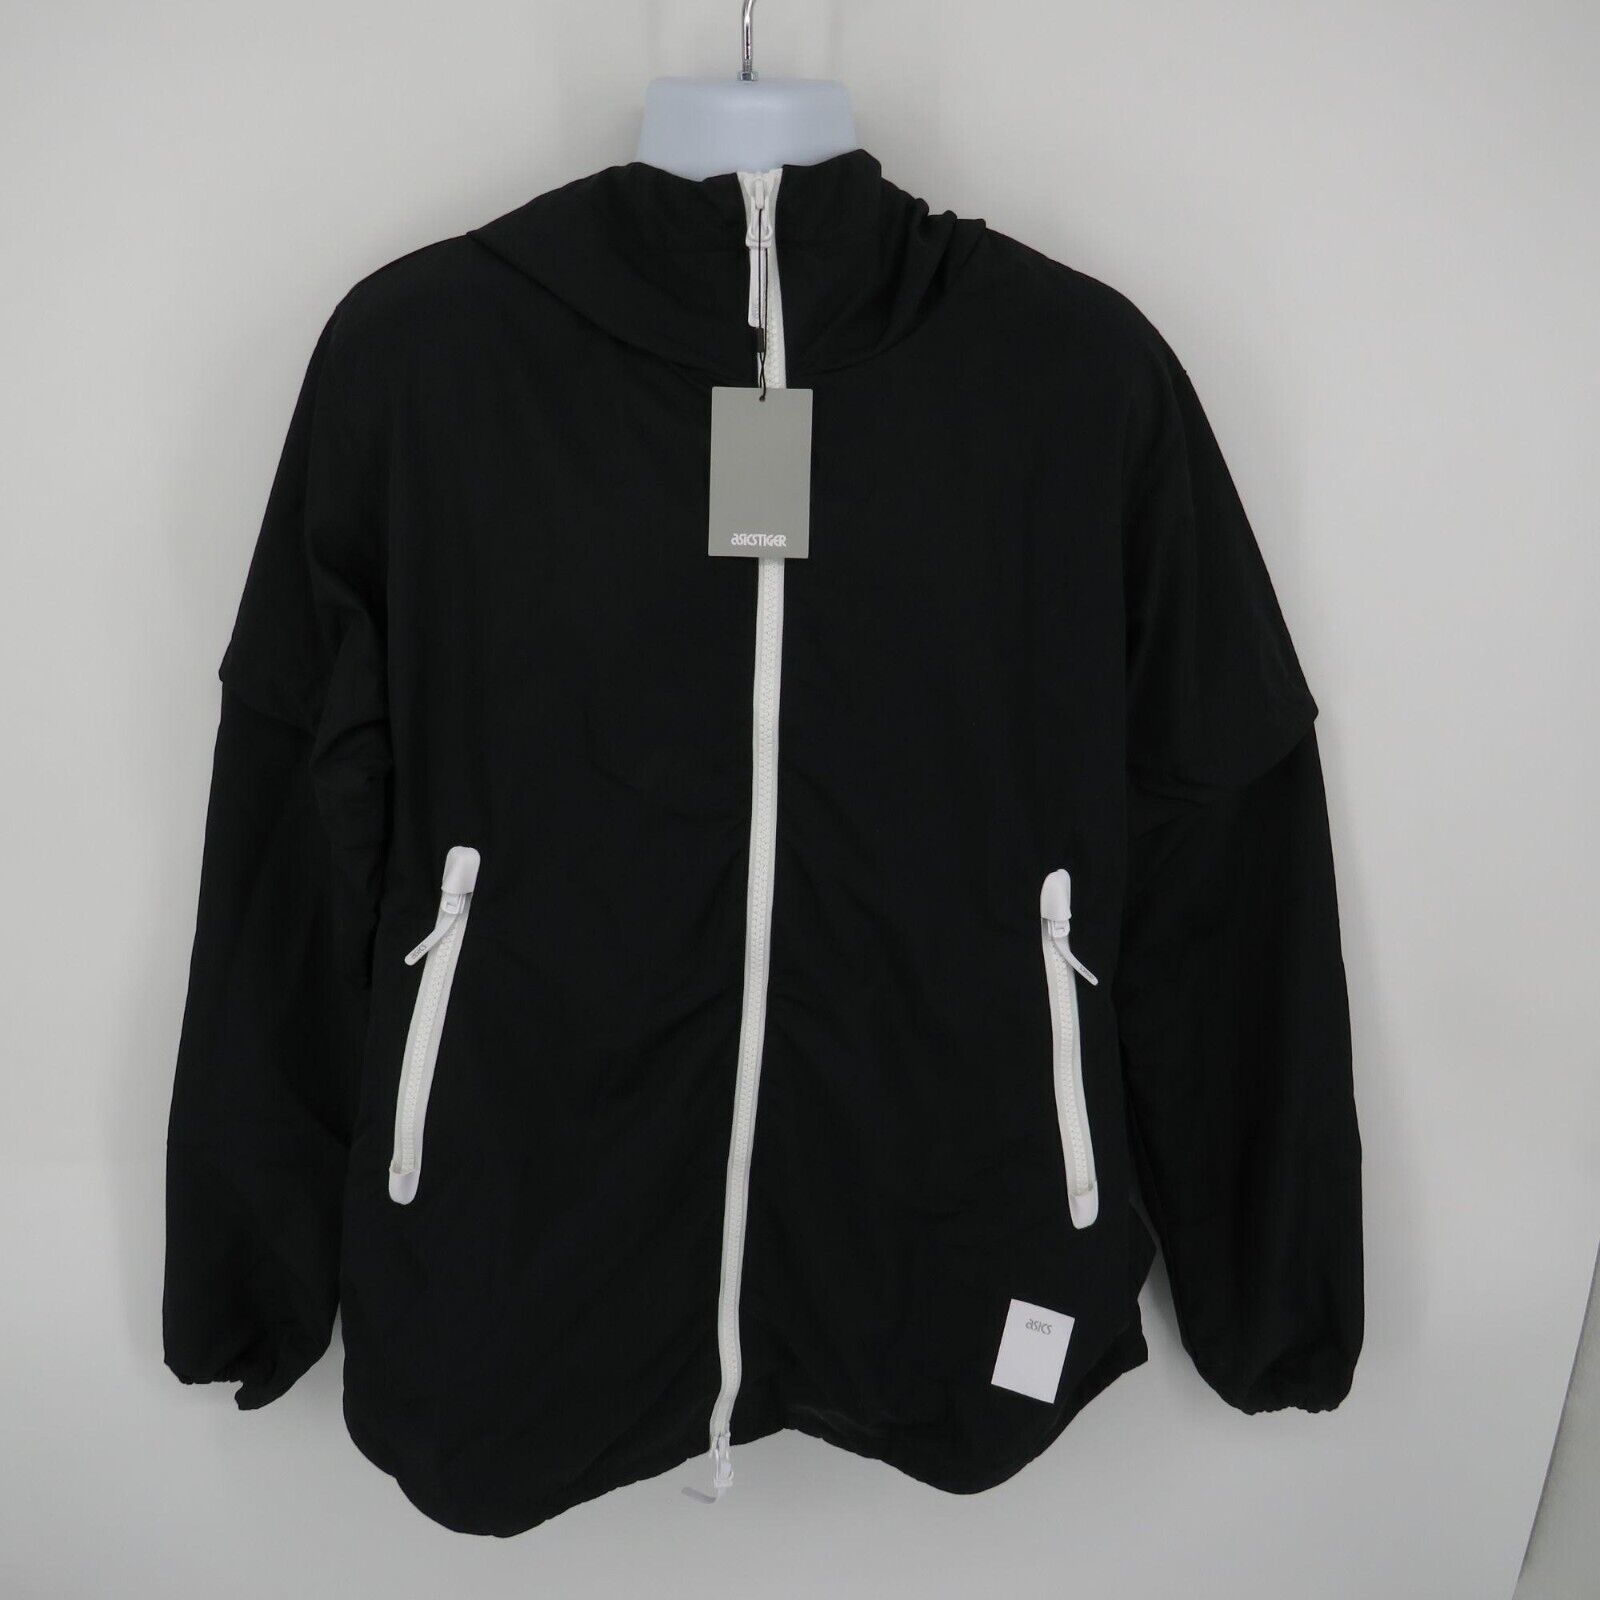 Primary image for Asics Men's Black Jacket Removable Sleeves XL NWT $120